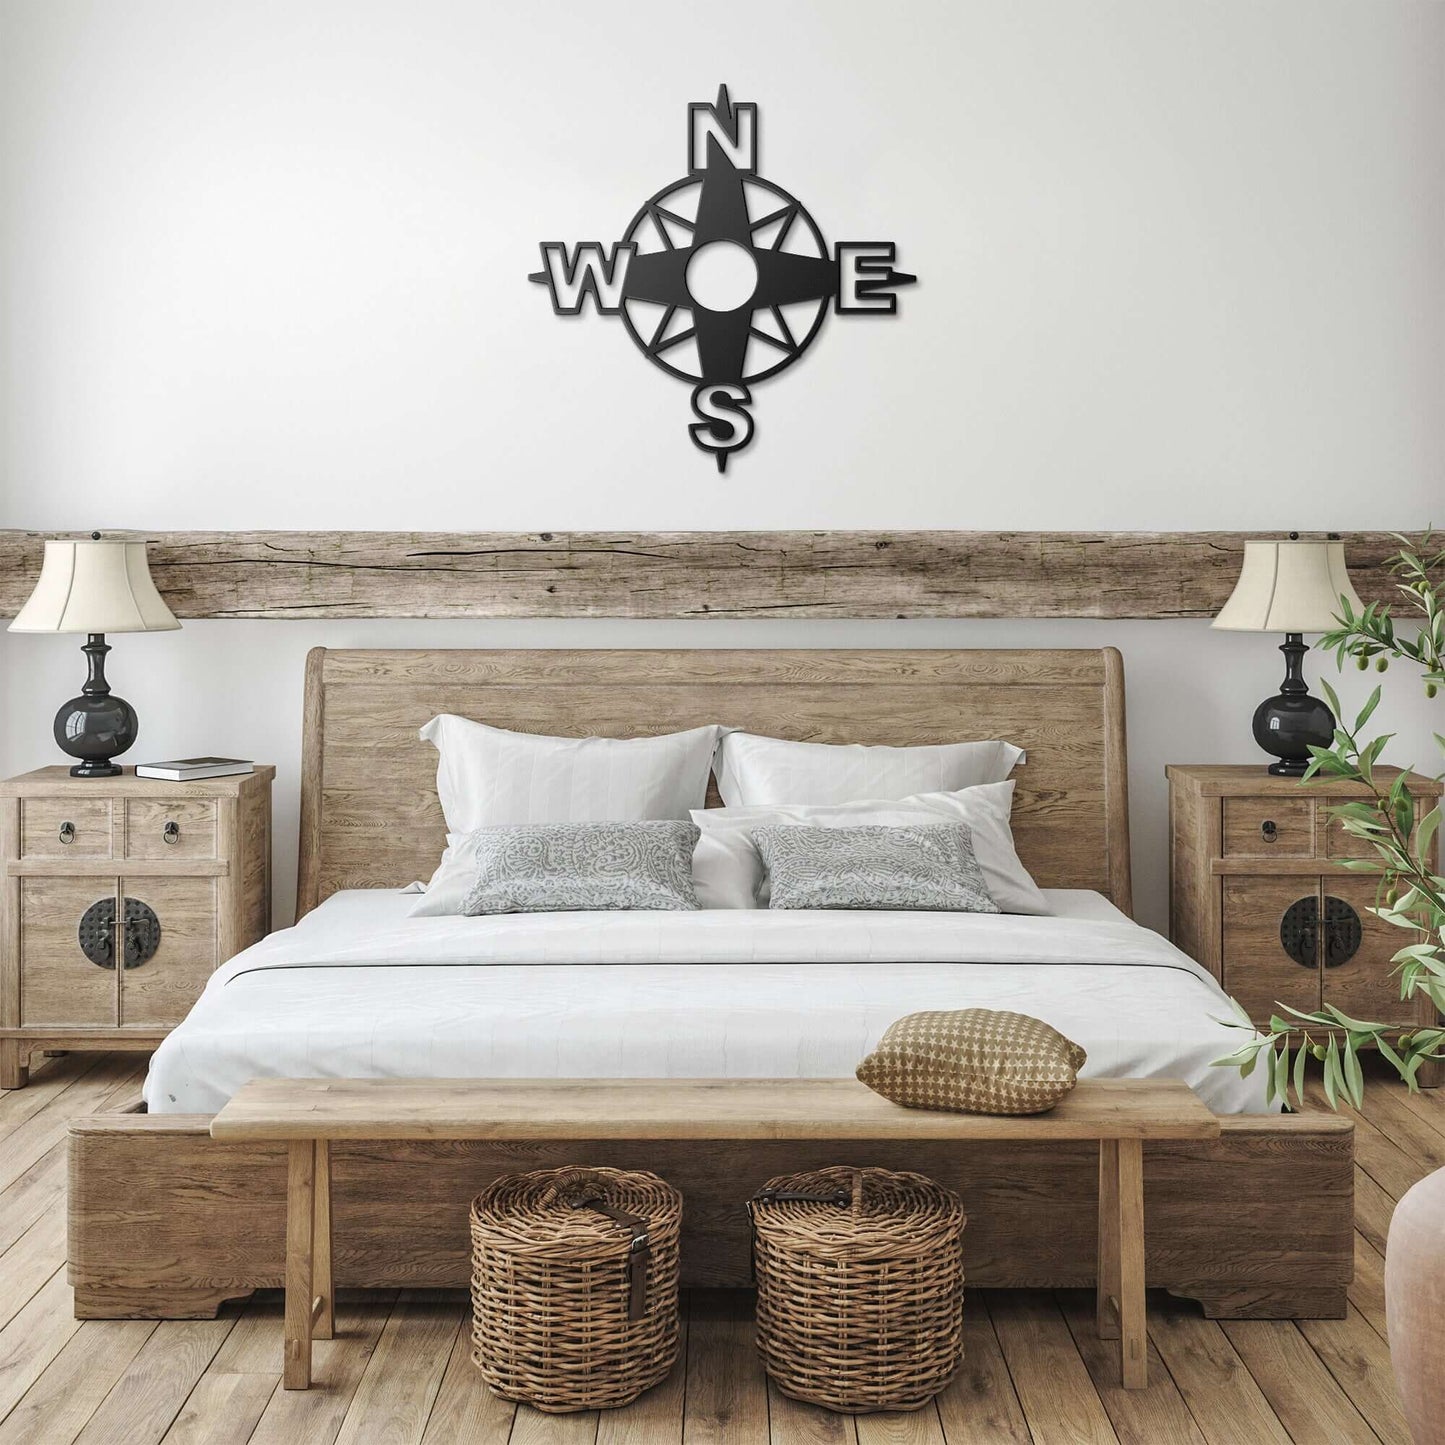 Round Compass Wall Decor - Steel Sign Of A Compass